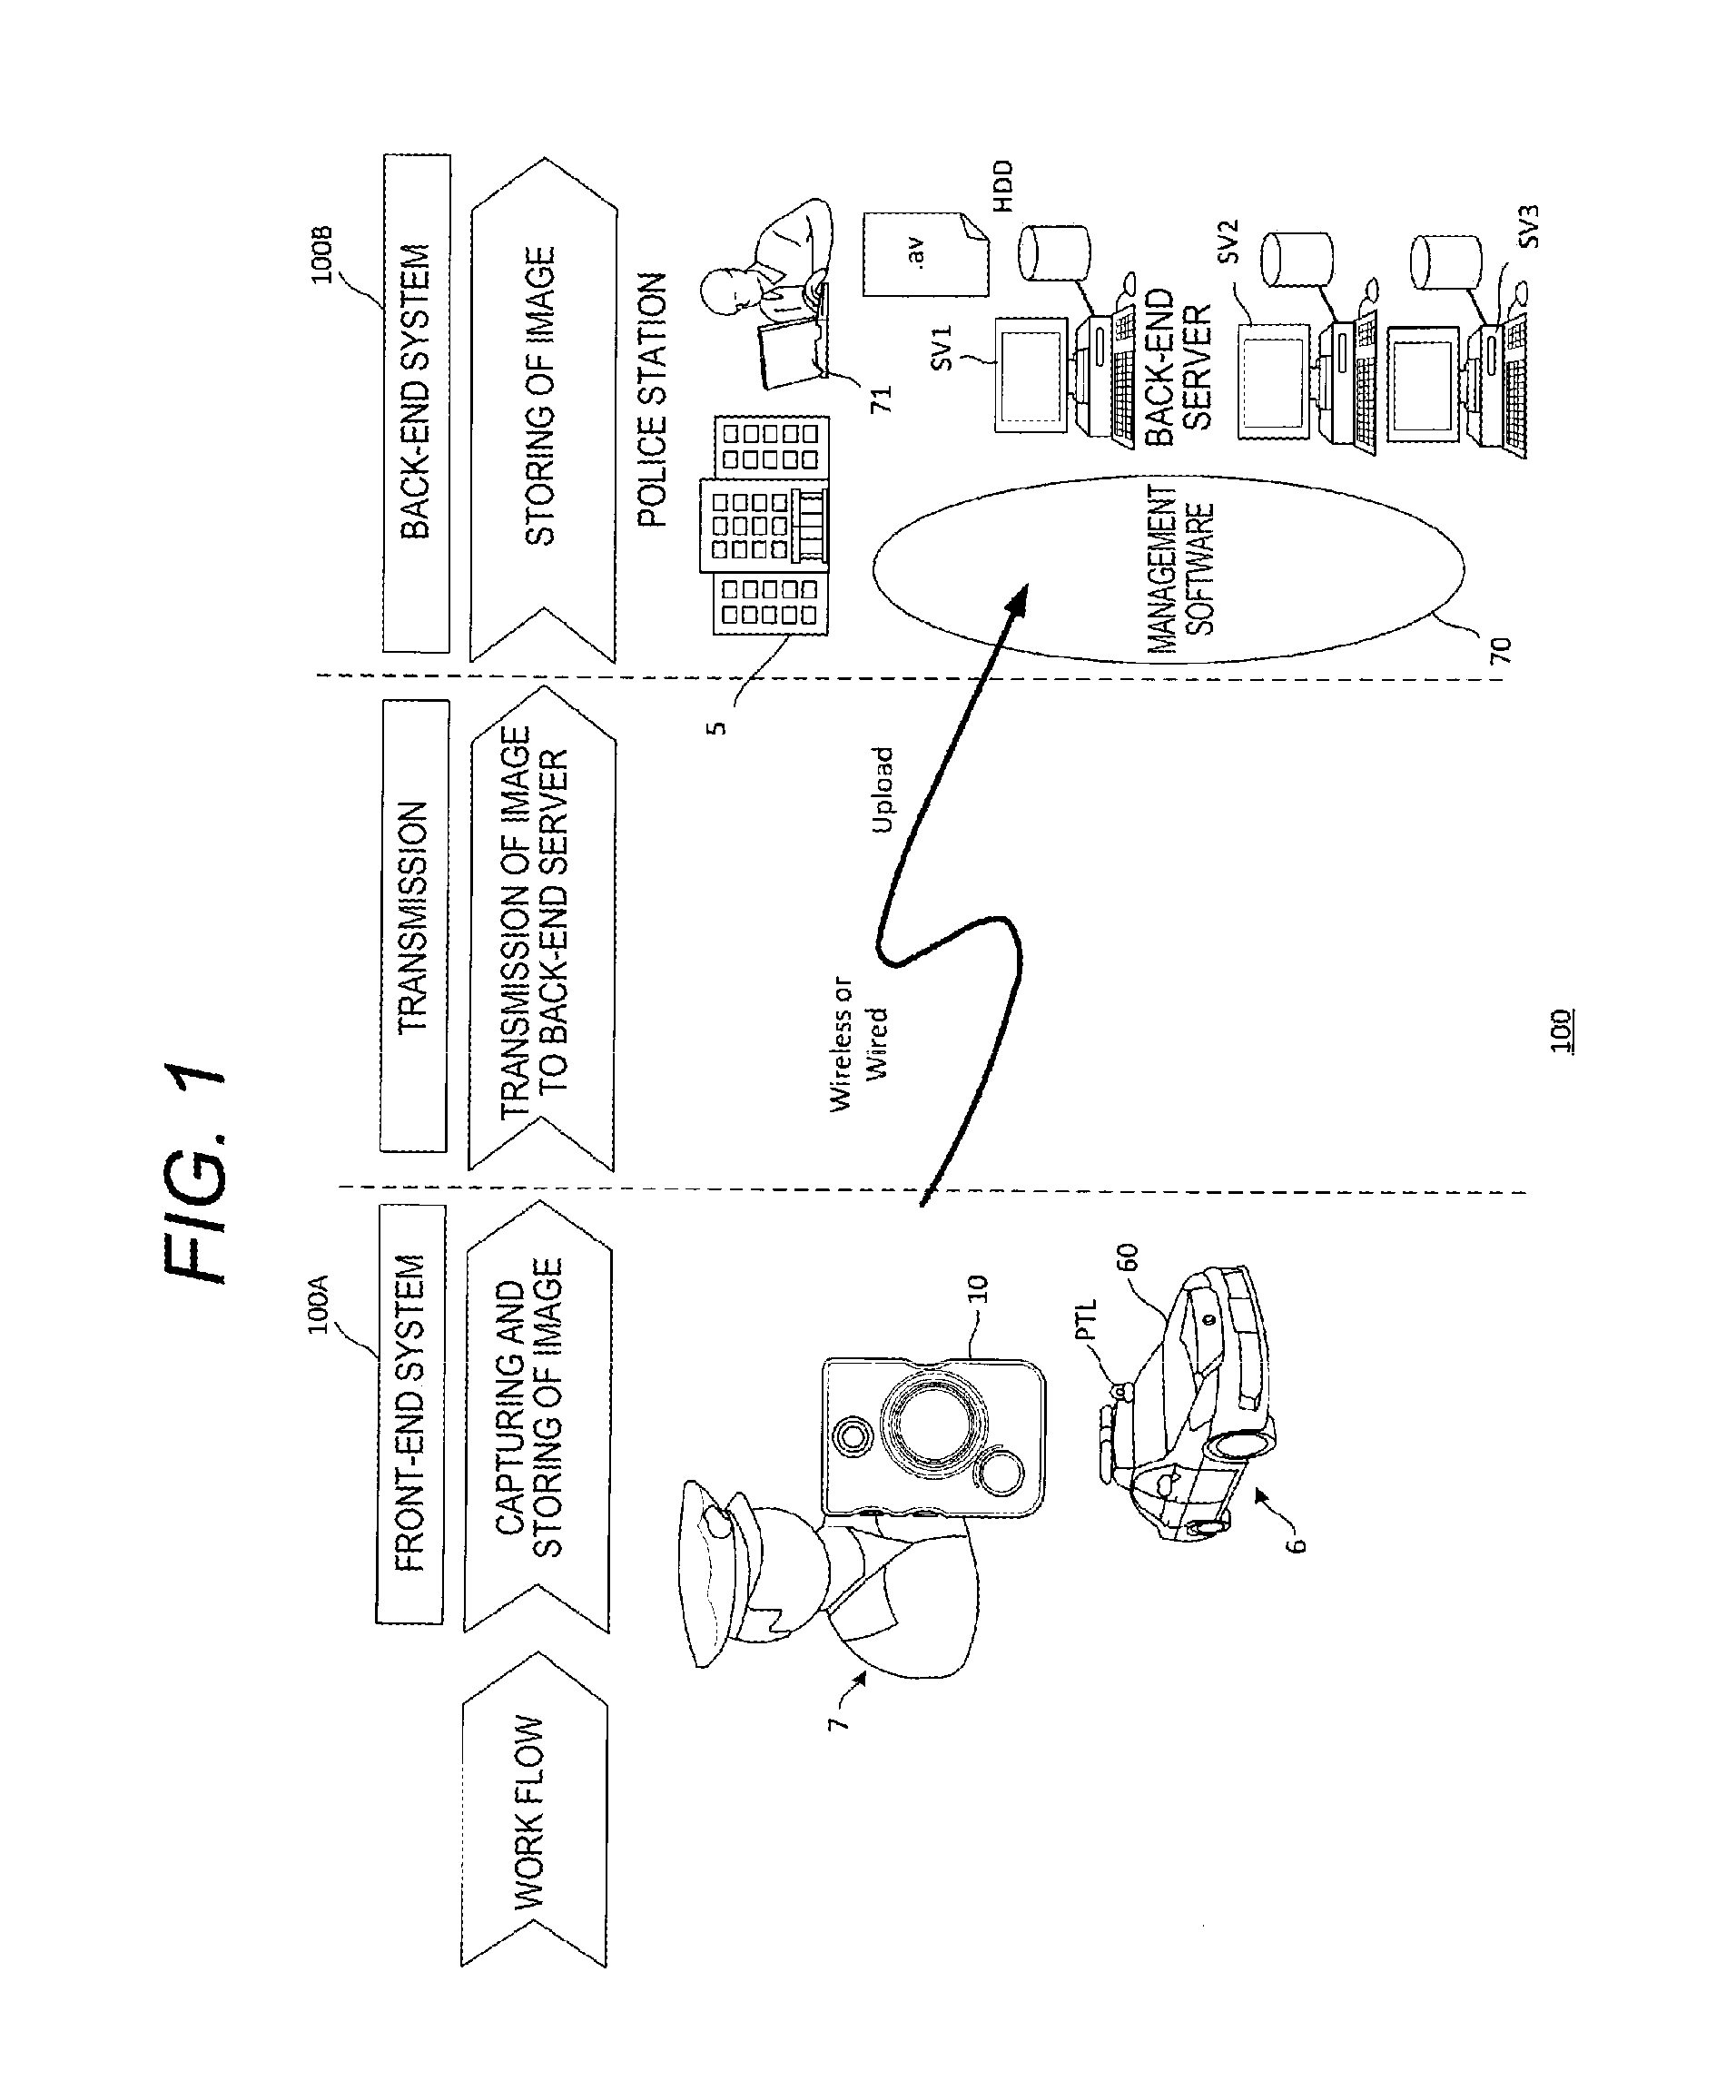 Wearable camera system and recording control method